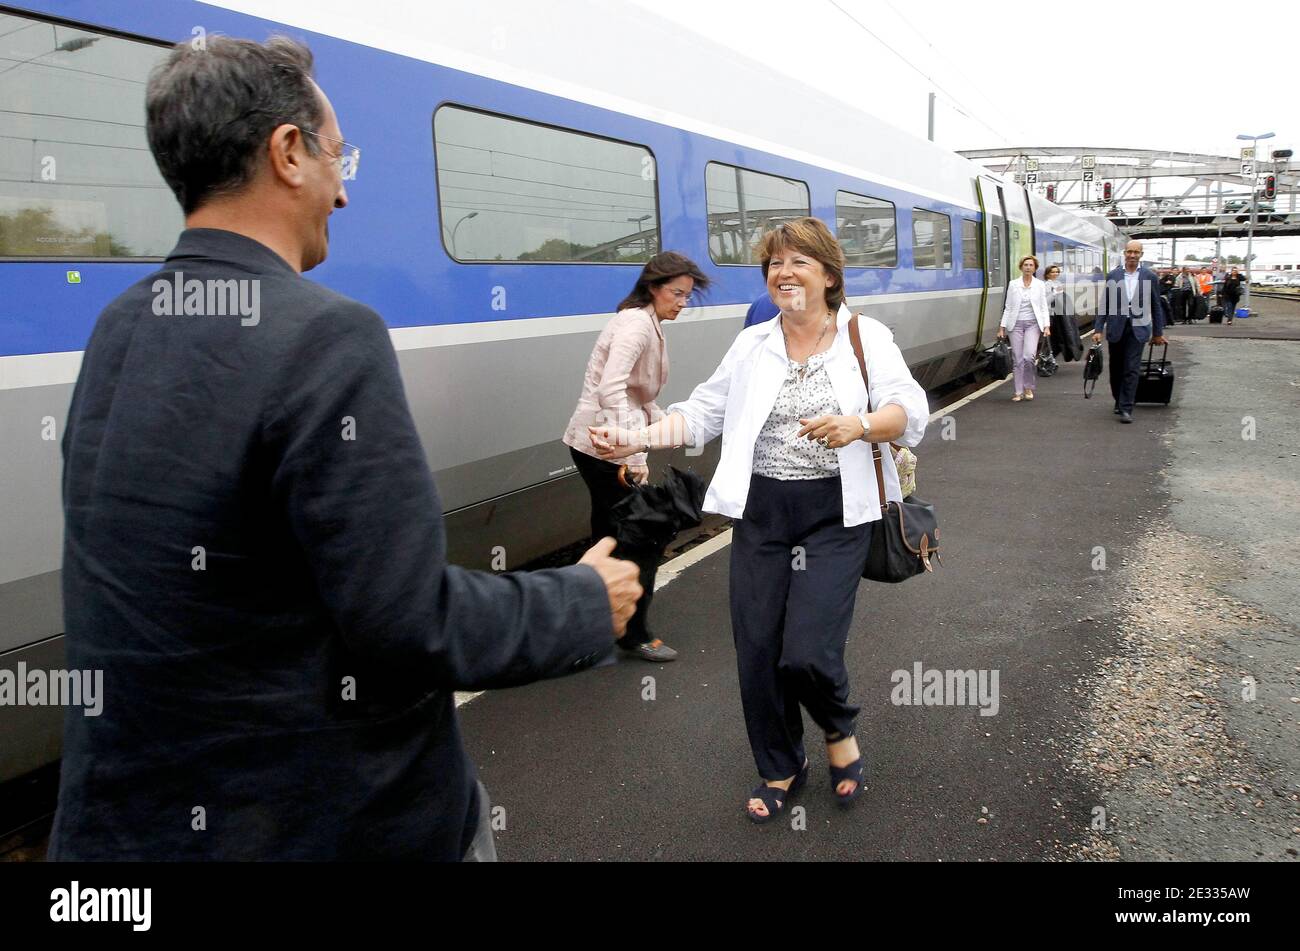 French Socialist Party first secretary Martine Aubry is welcomed by her special advisor Francois Lamy as she arrives by train to the station of La Rochelle, western France on August 26, 2010. Aubry came to open the Socialist Party's annual summer camp. Photo by Patrick Bernard/ABACAPRESS.COM Stock Photo